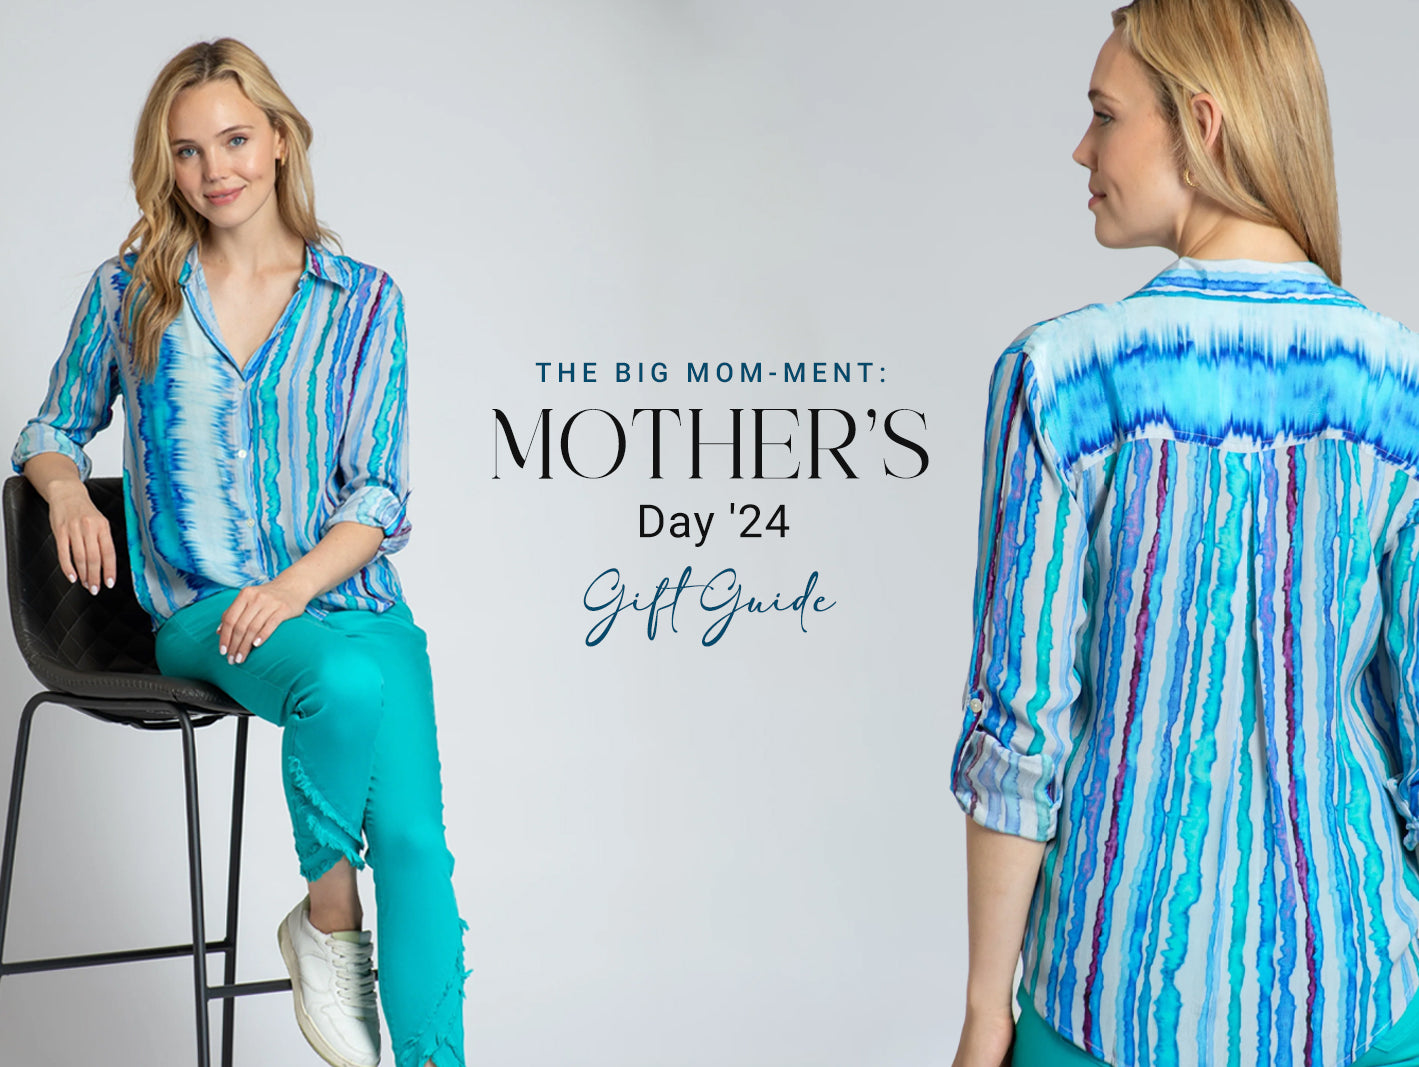  Mother's Day '24 Gift Guide